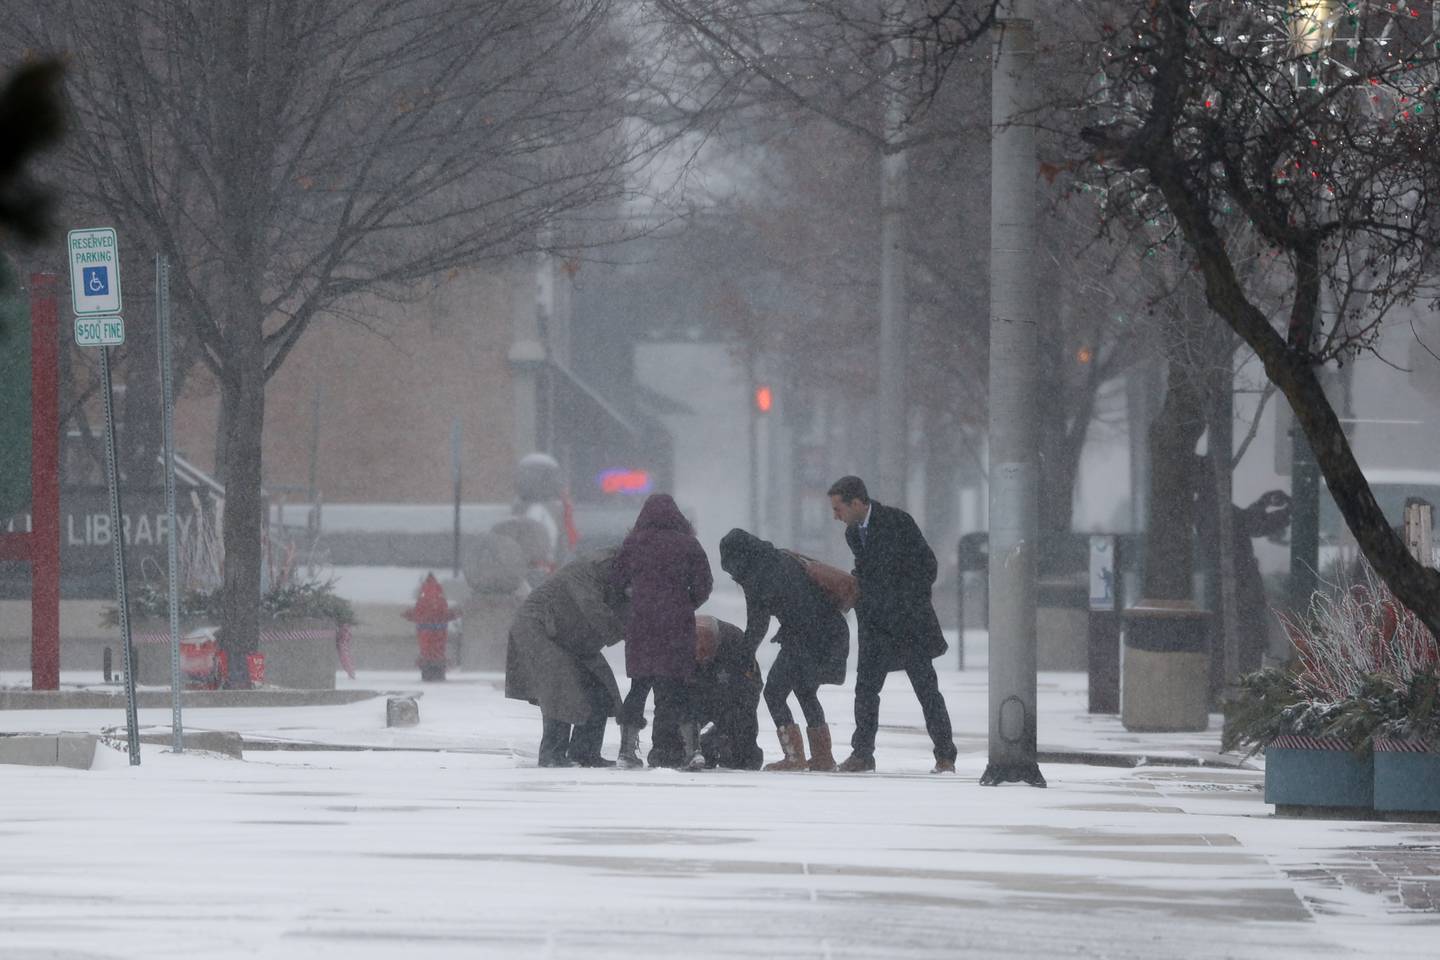 A group helps up a member of their party who slipped on the icy sidewalk along North Chicago Street in Downtown Joliet.